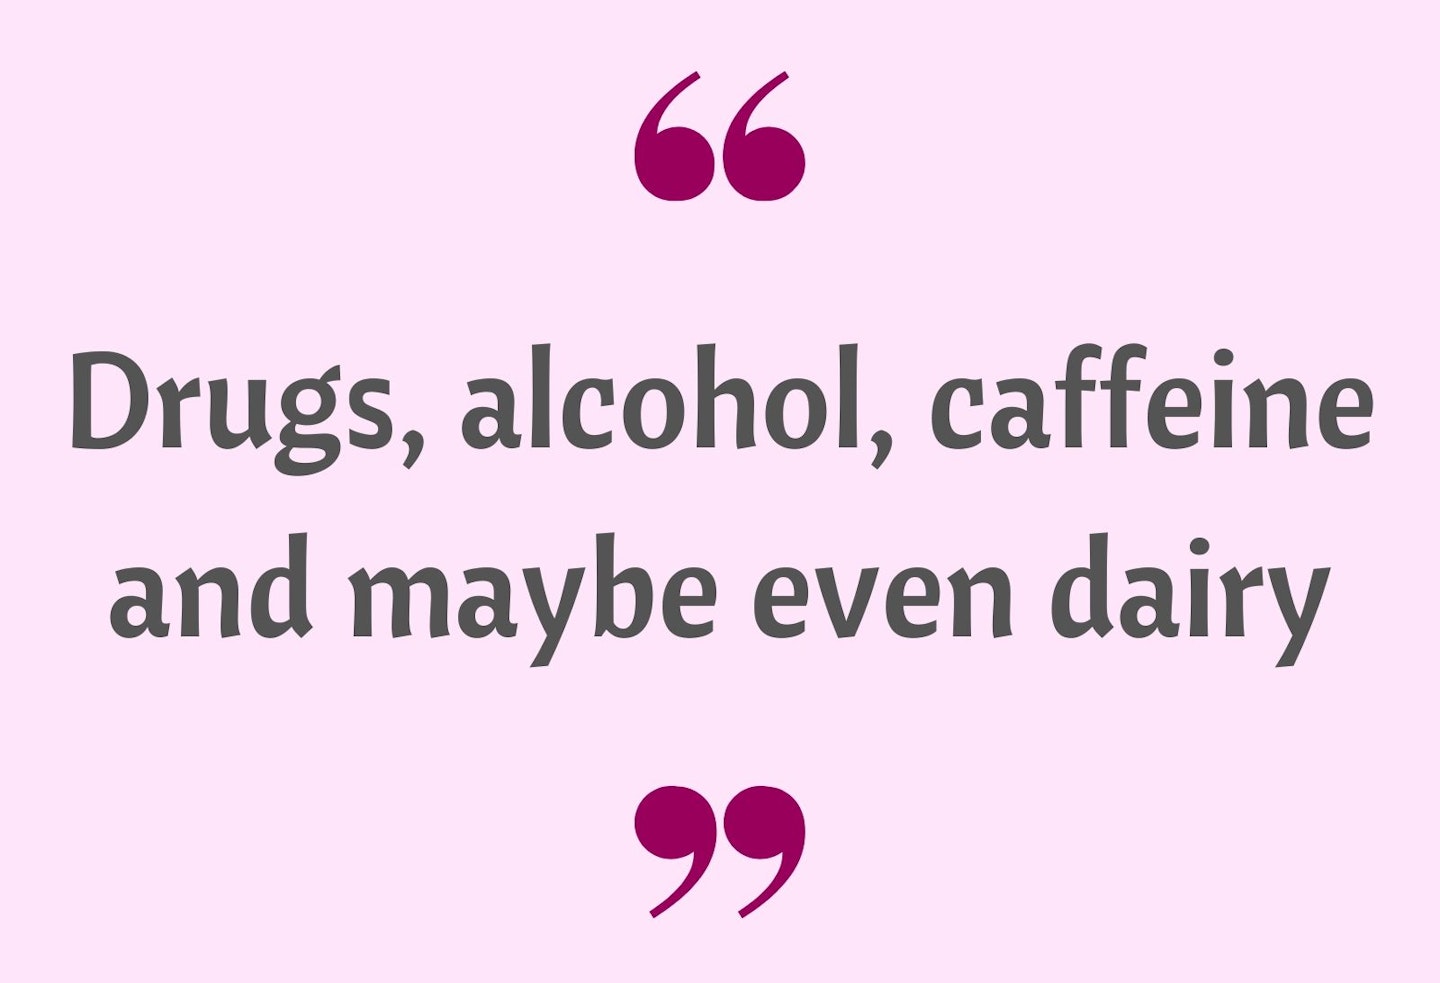 21) Drugs, alcohol, caffeine (and maybe even dairy!)